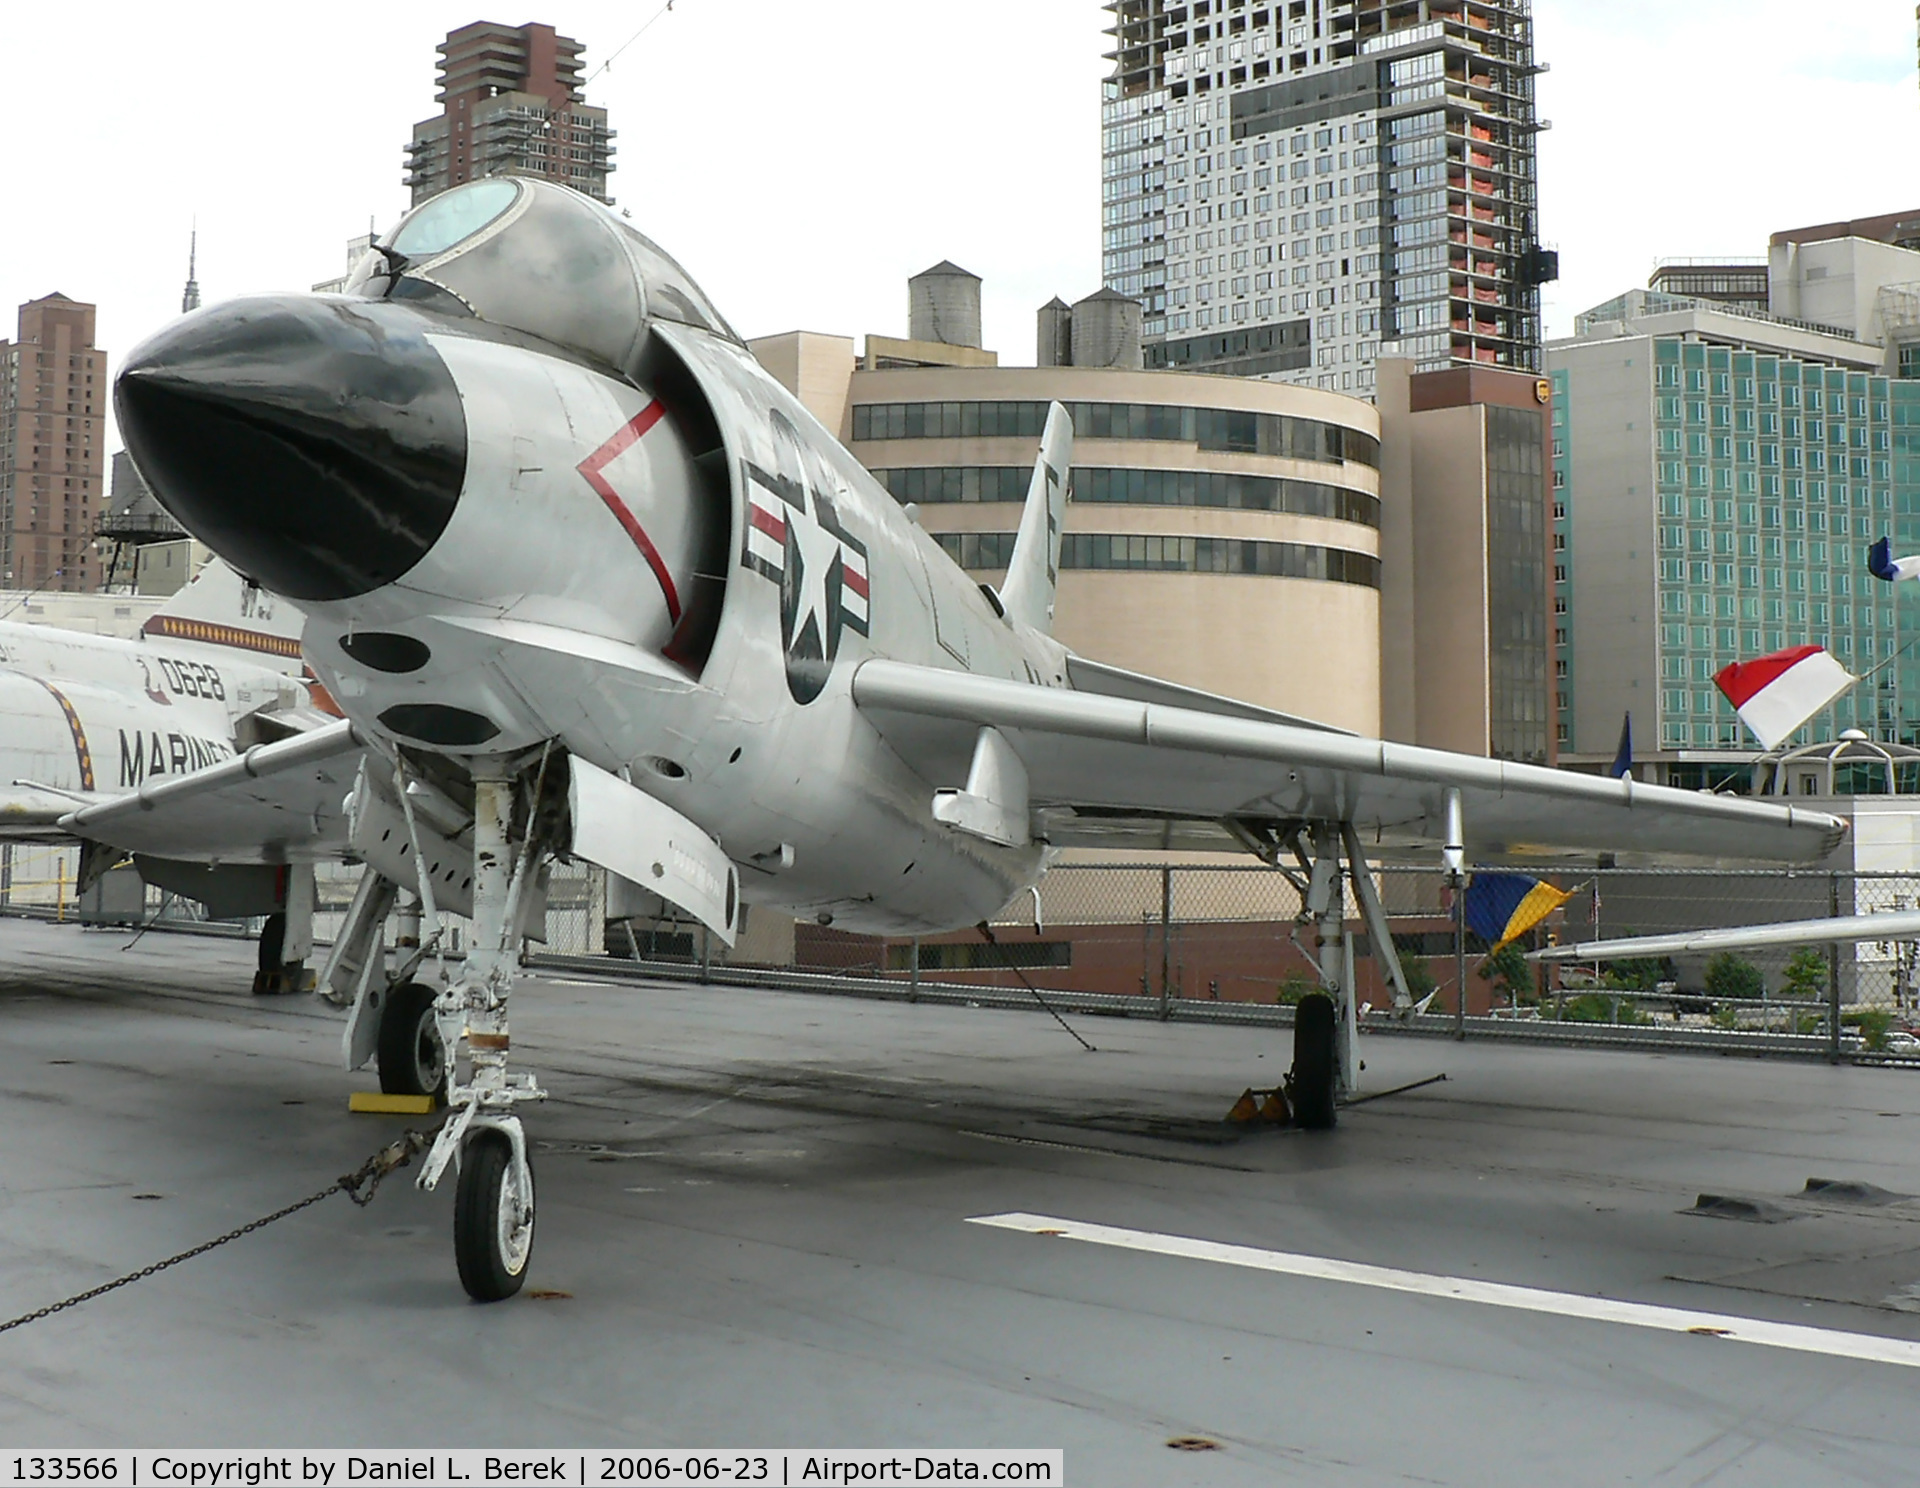 133566, McDonnell F3H-2N Demon C/N 78, On loan from the National Museum of Naval Aviation, this Cold War warrior currently resides on the USS Intrepid.